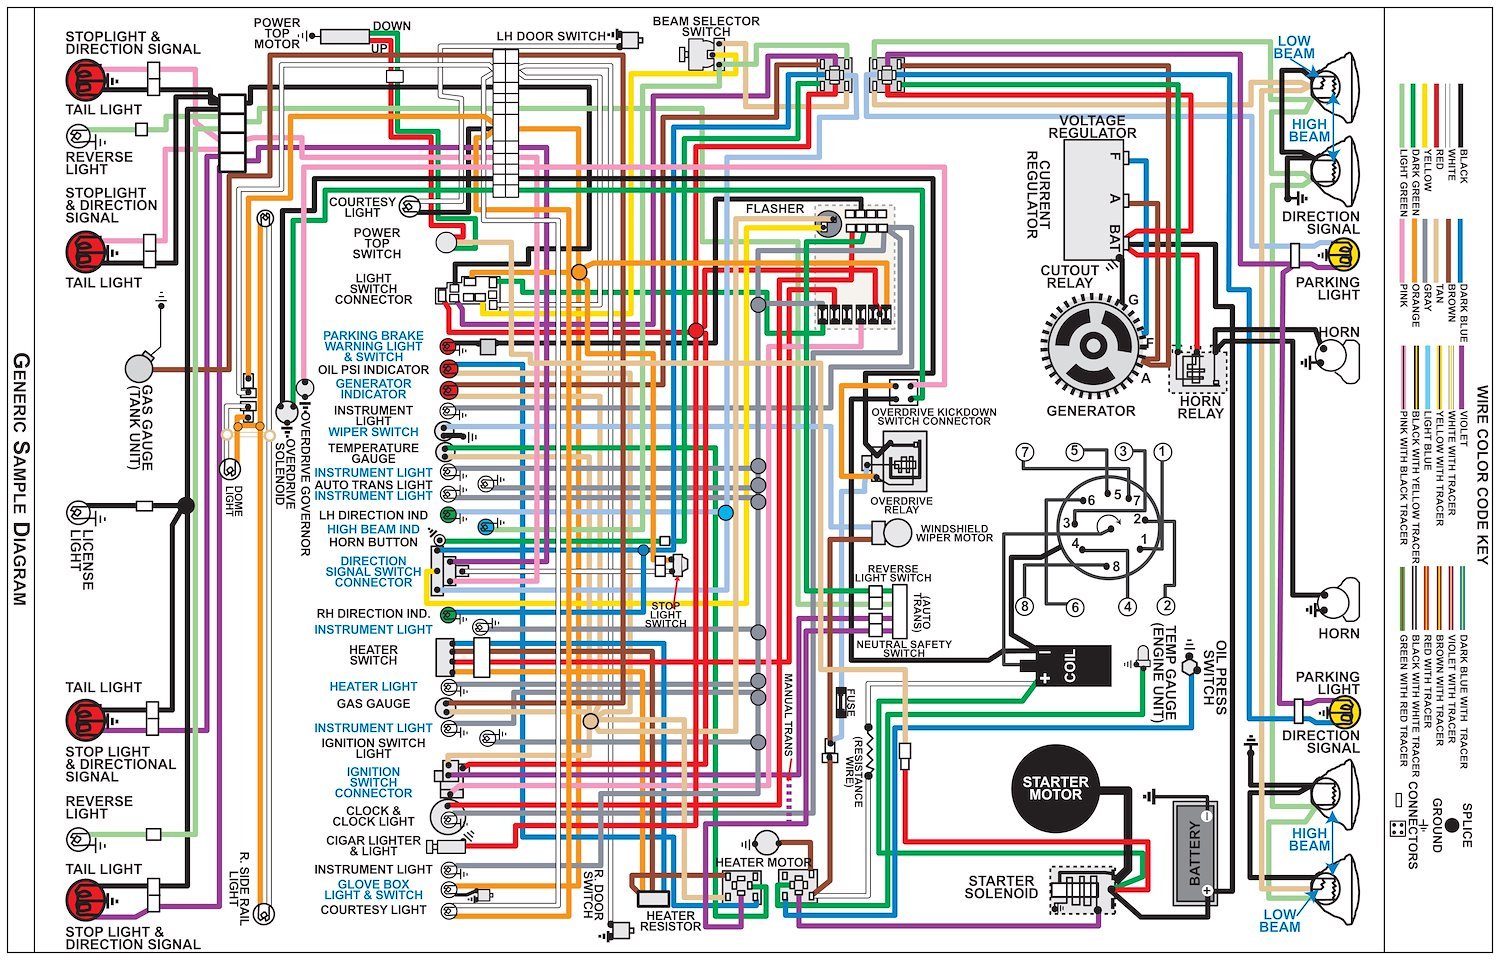 Wiring Diagram for 1957 Ford F-Series Truck, 11 in x 17 in., Laminated